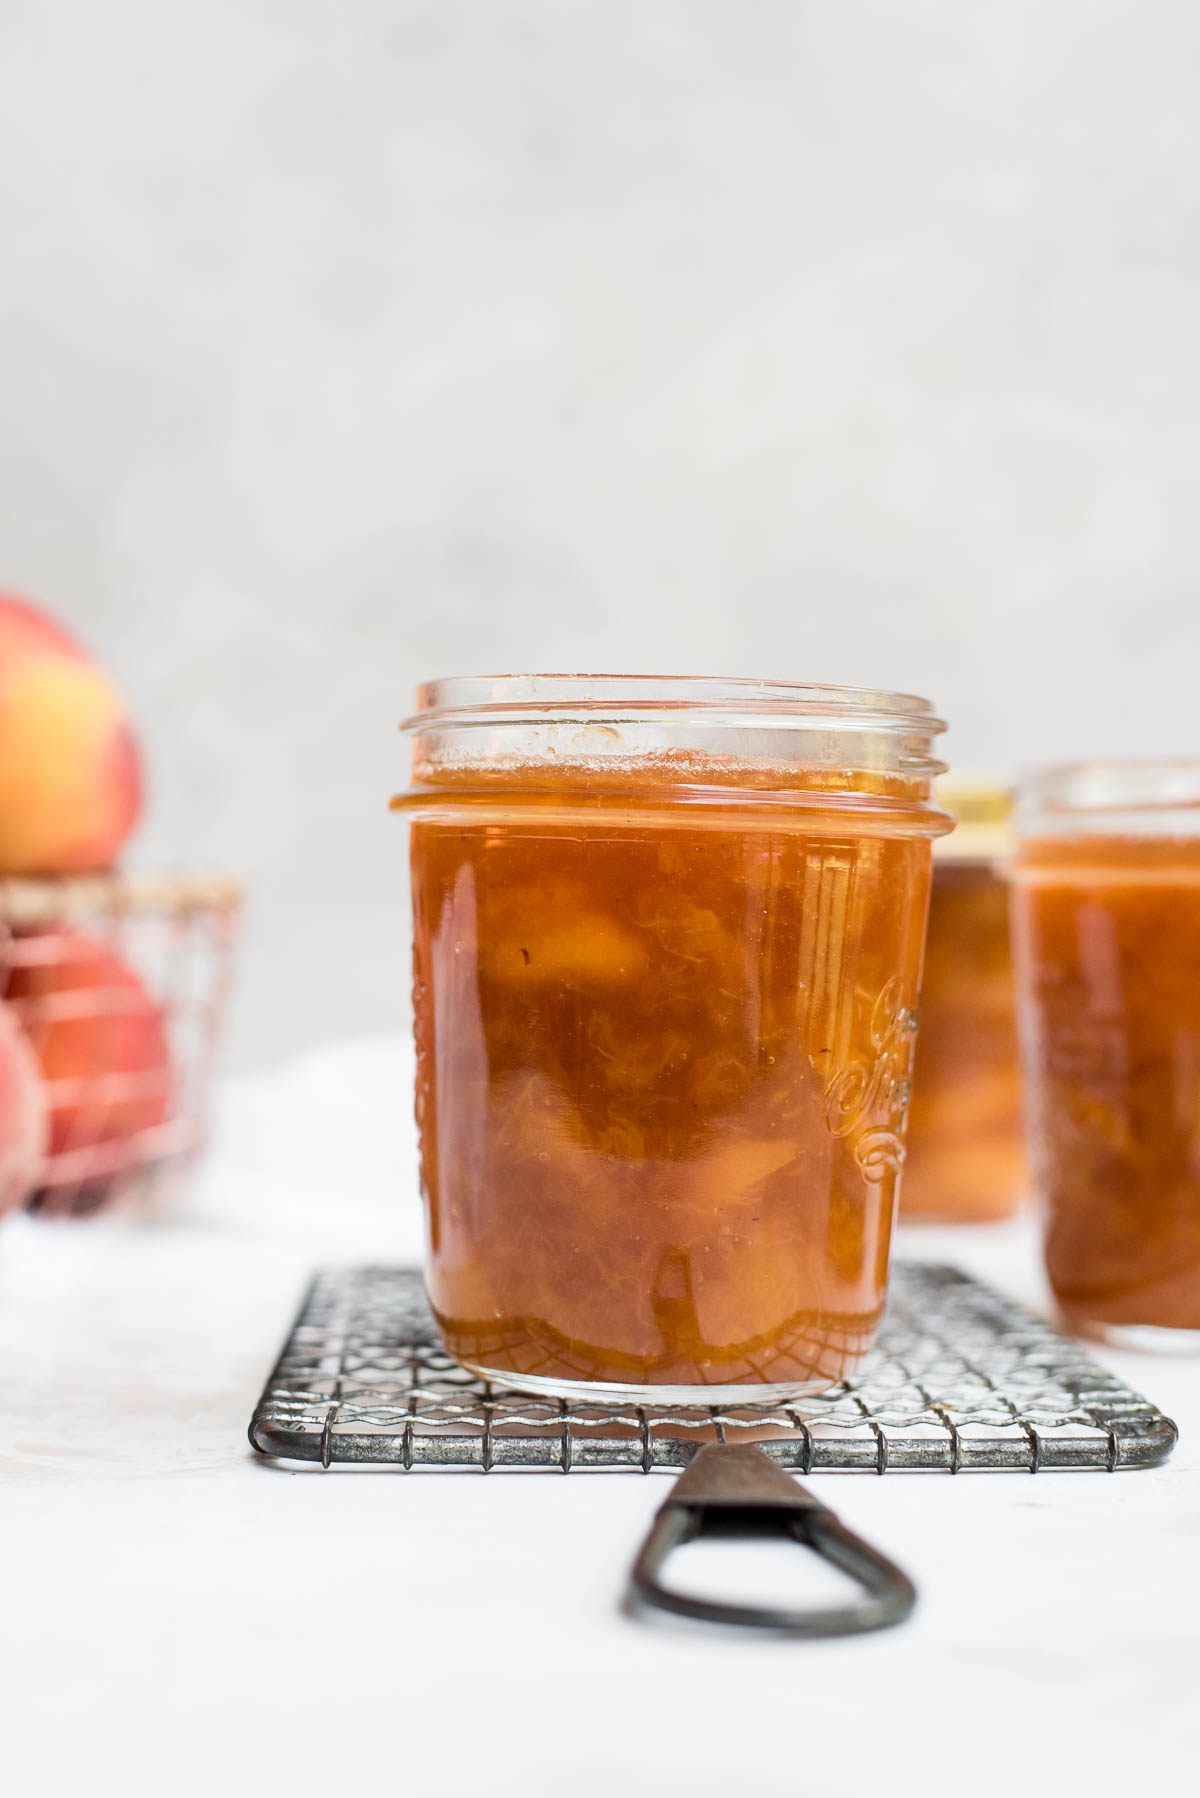 peach jam in a jar with peaches in the background